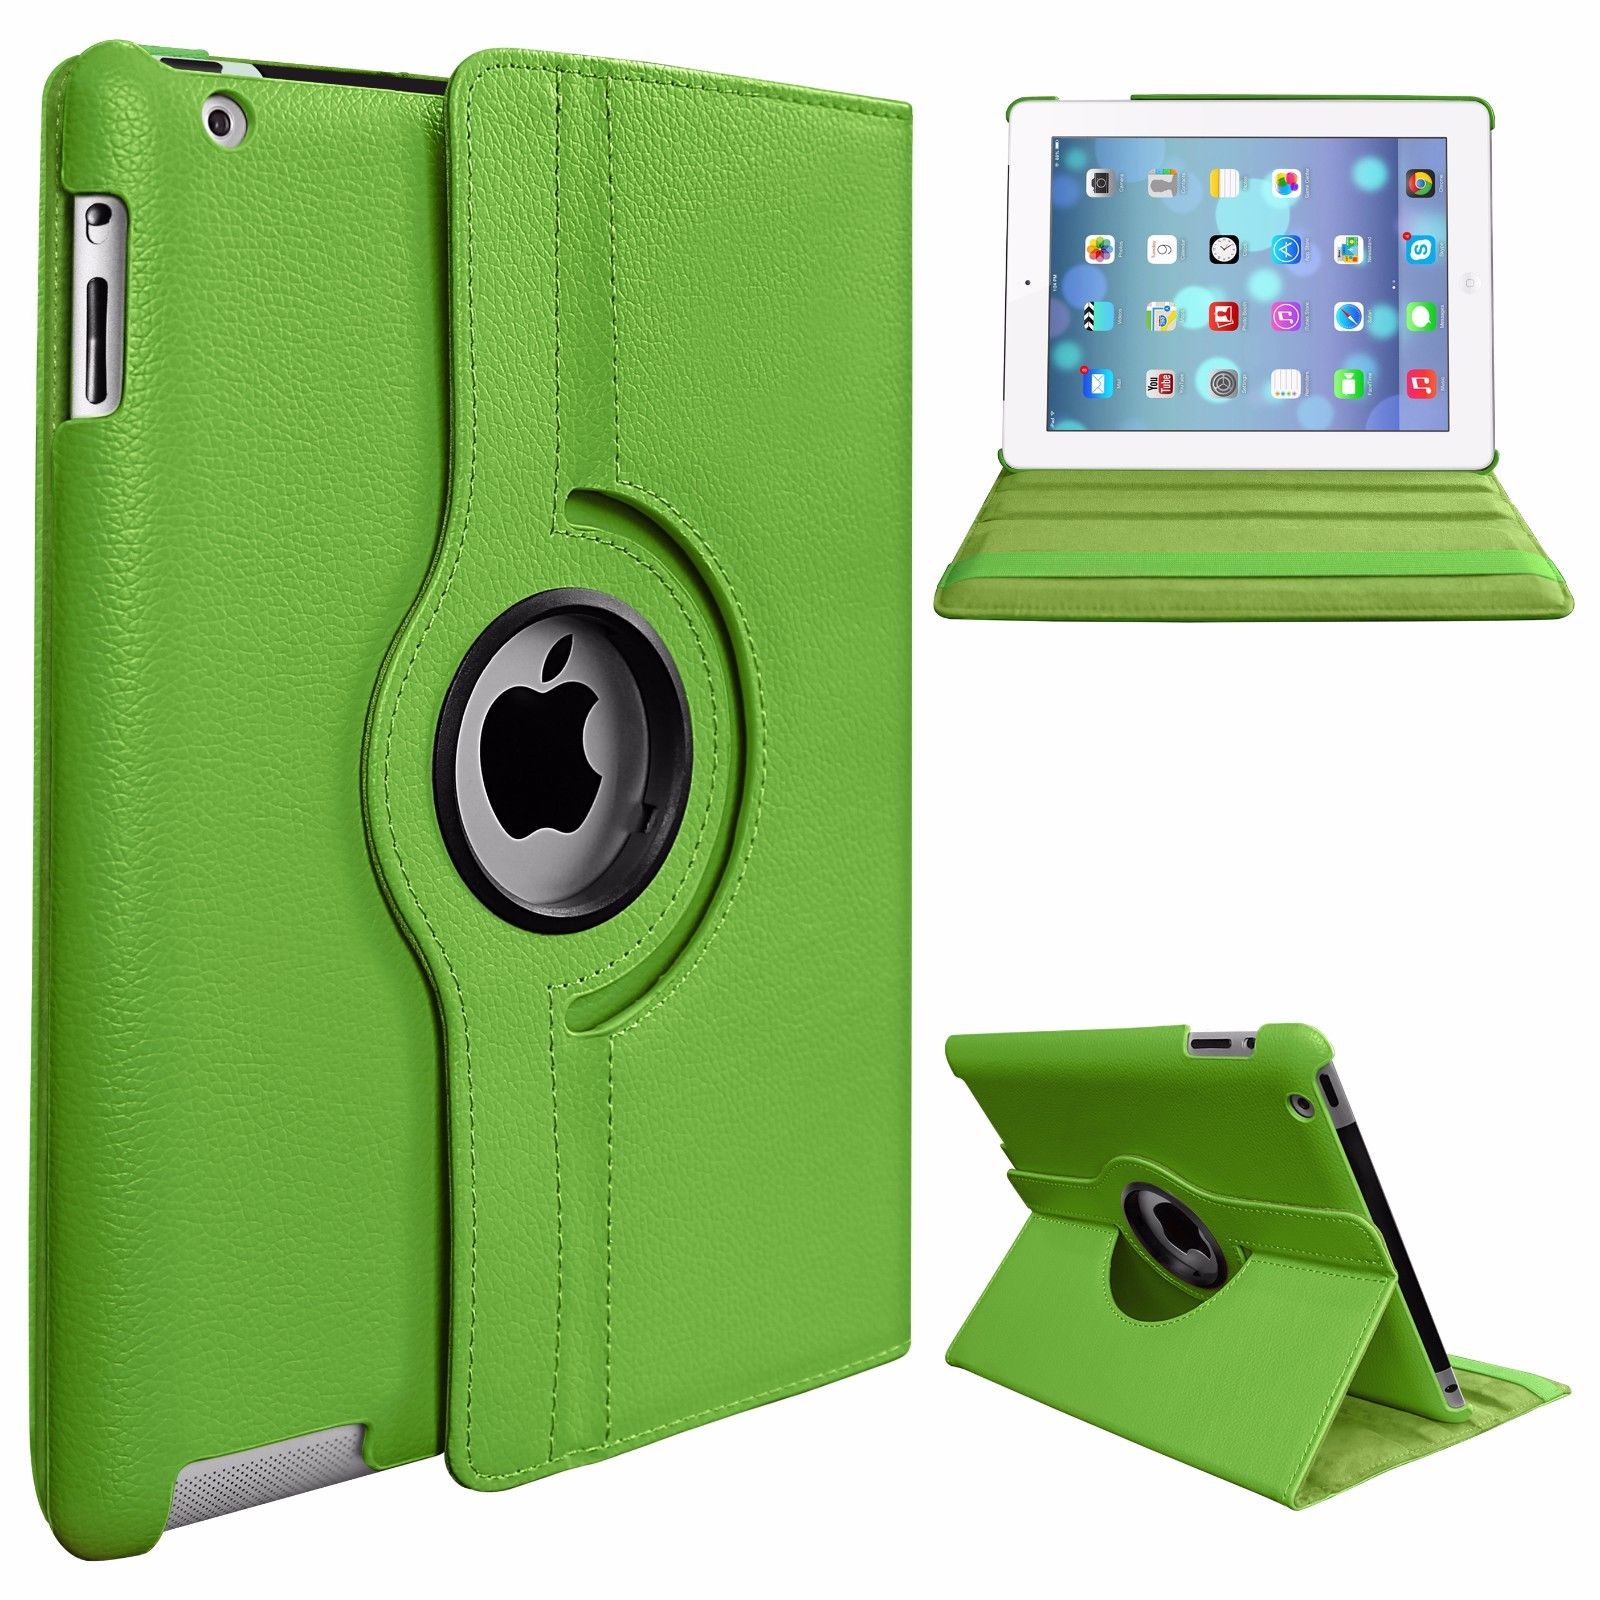 360 Degree Rotating Stand PU Leather Case Cover for Apple iPad2 iPad3 iPad4 Green